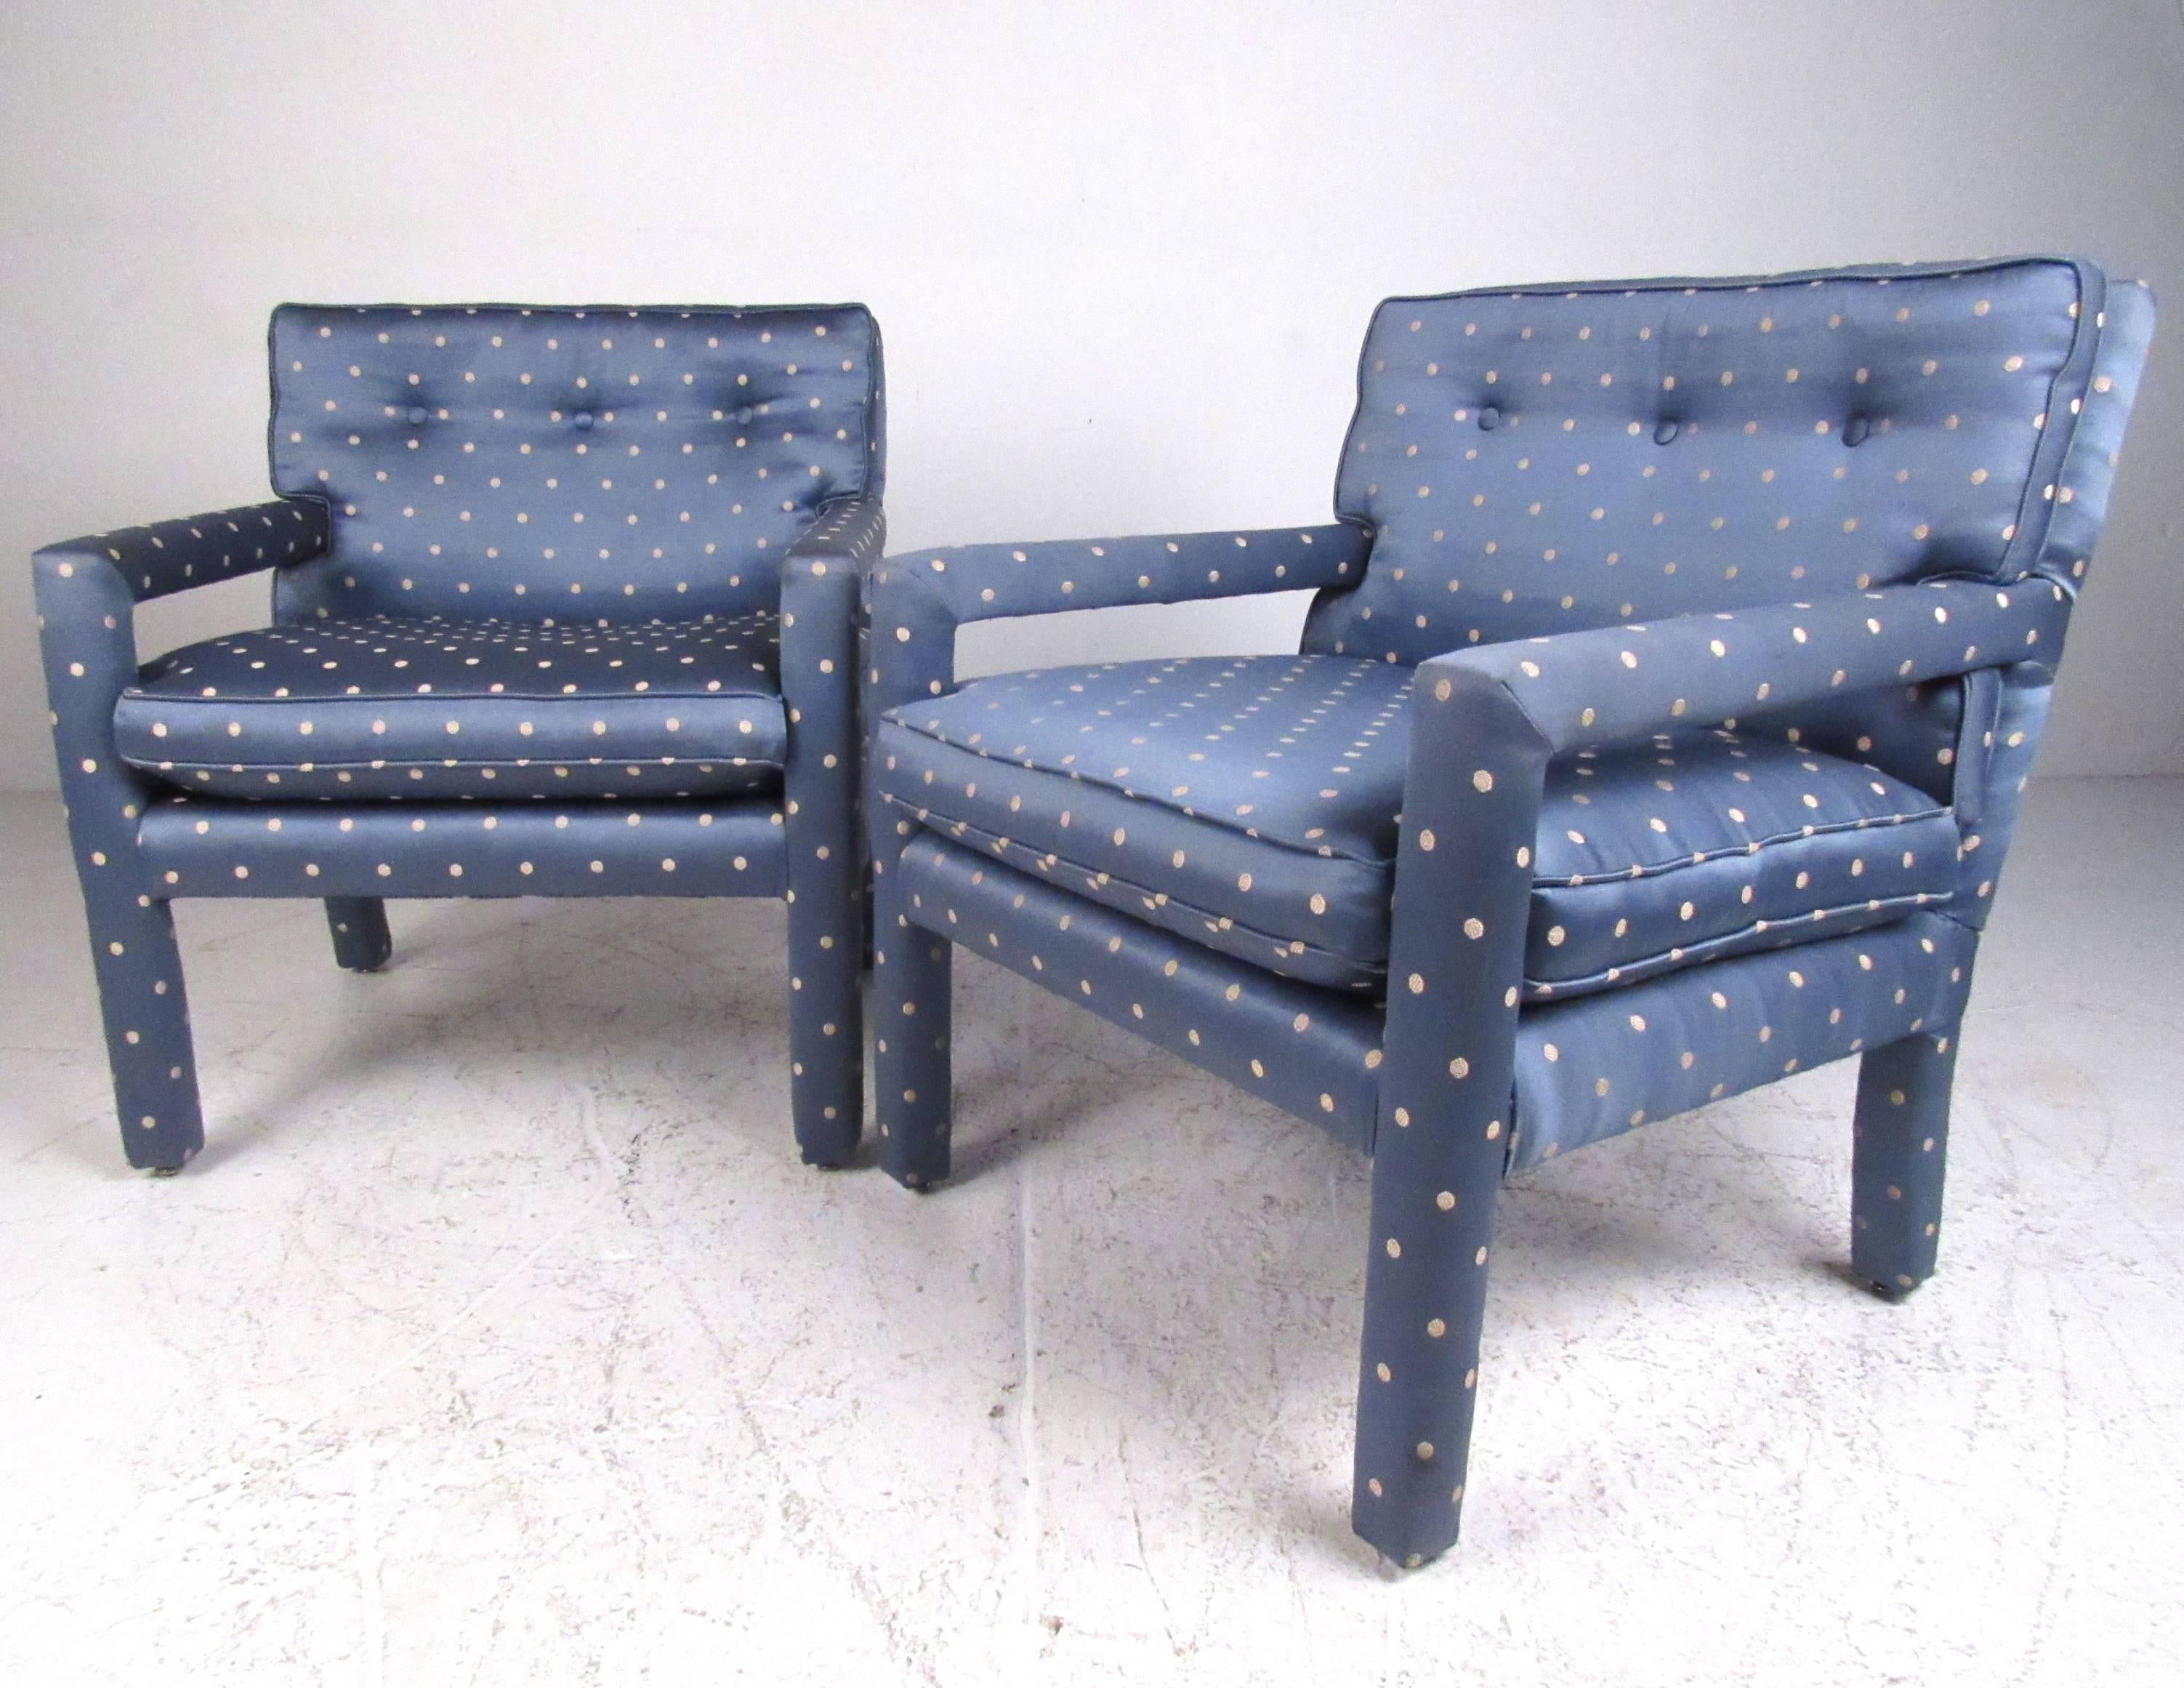 This stylish vintage modern pair of parson style side chairs feature unique tufted blue upholstery and plush padded seats. Wonderful mix of style and timeless comfort, this matching pair are perfect for home or business seating. Please confirm item